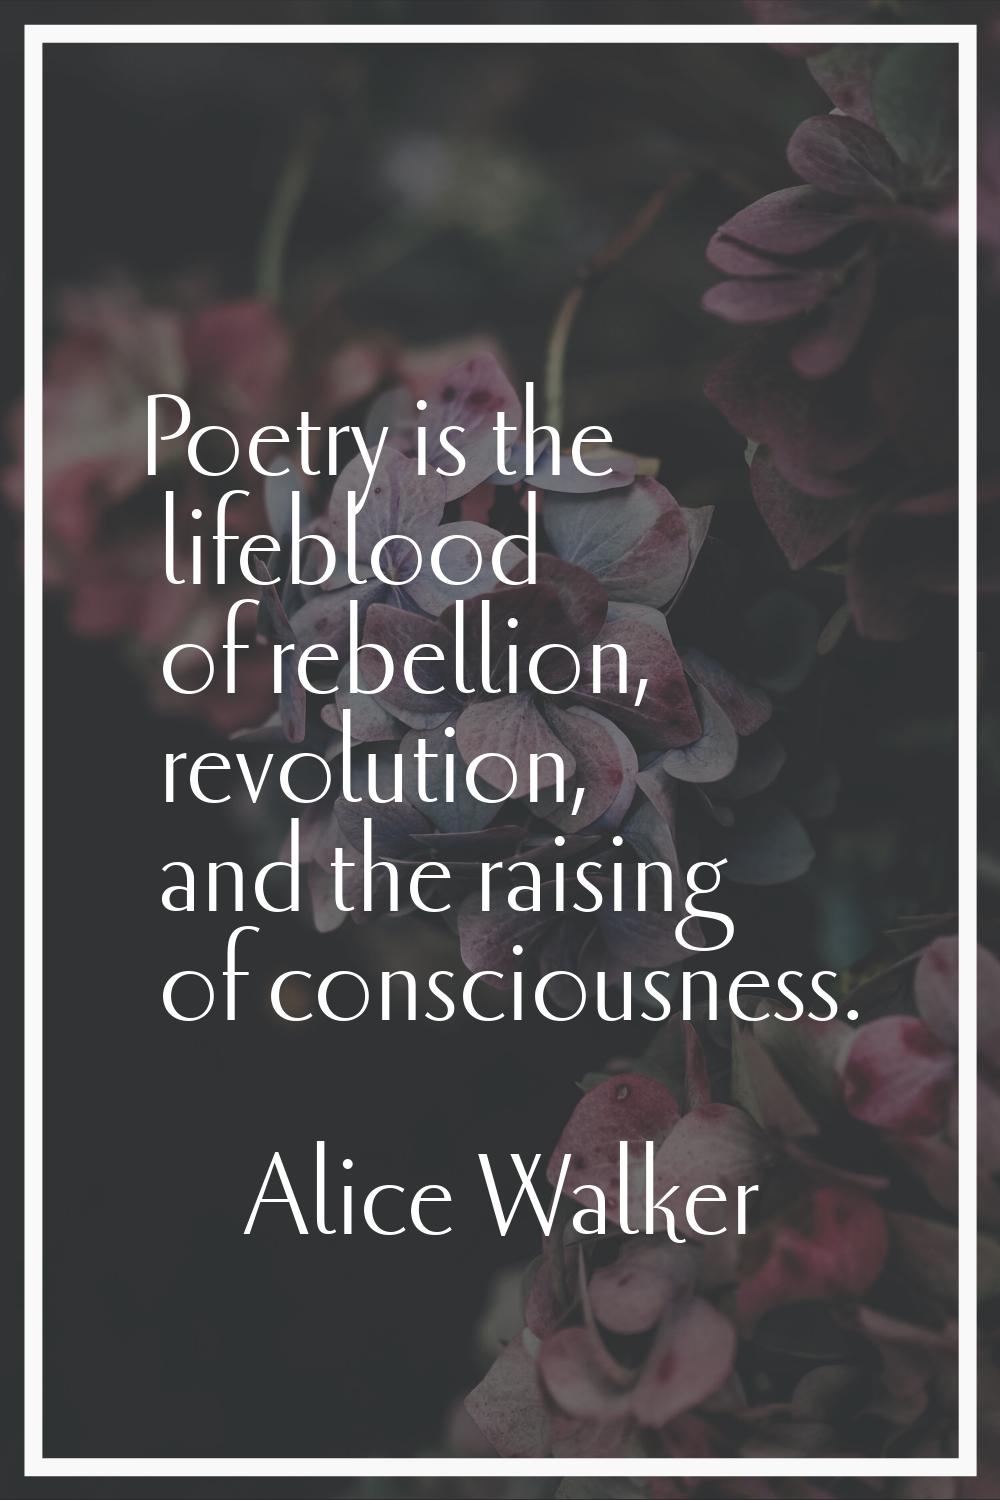 Poetry is the lifeblood of rebellion, revolution, and the raising of consciousness.